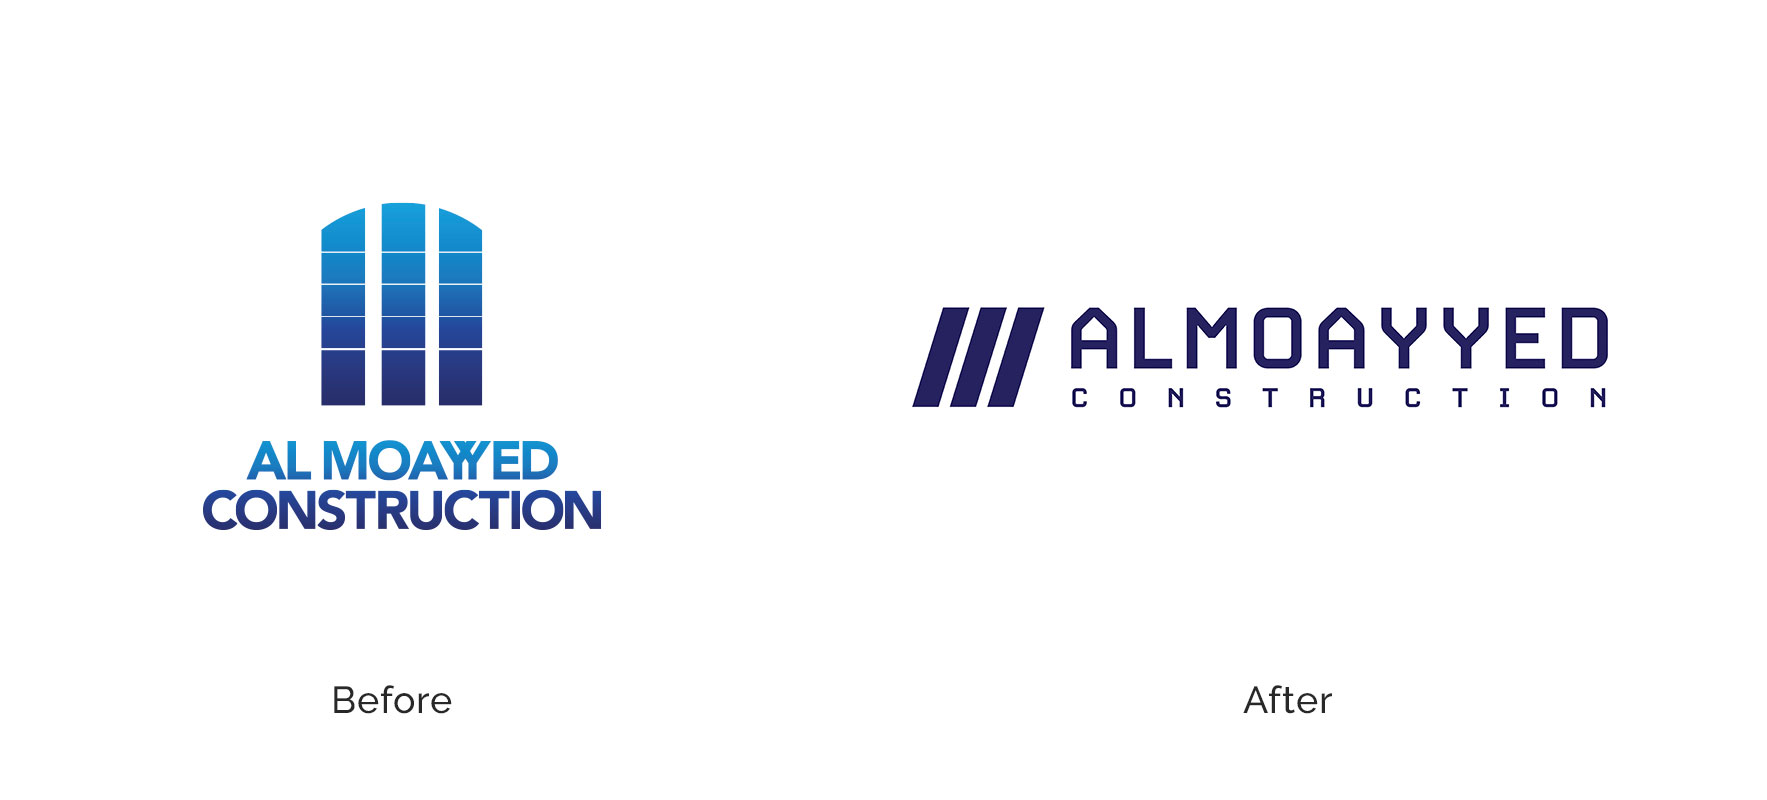 Almoayyed Construction